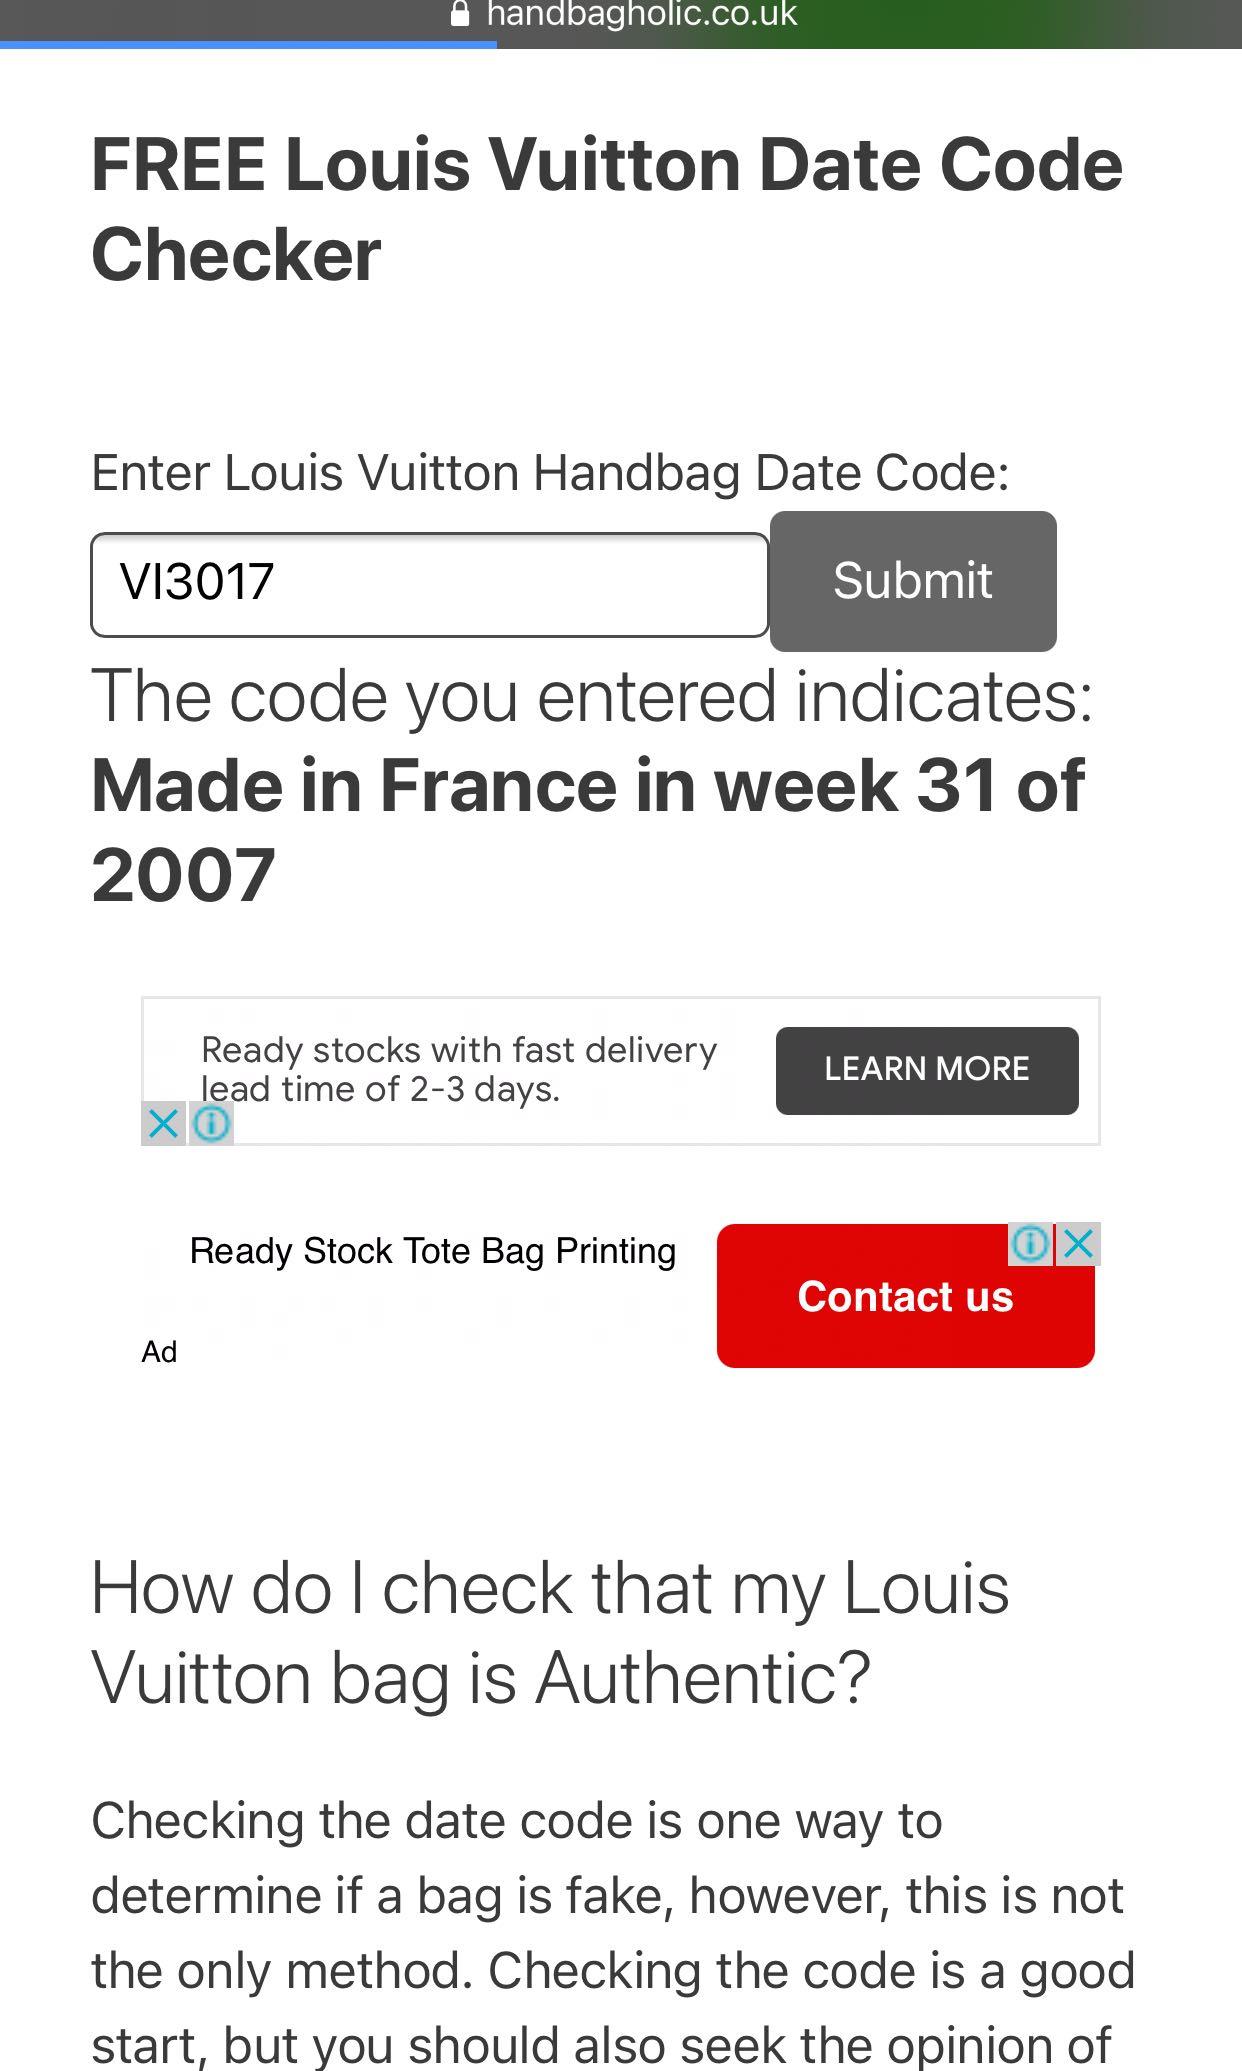 Handbagholic - Find out what the date code in your Louis Vuitton